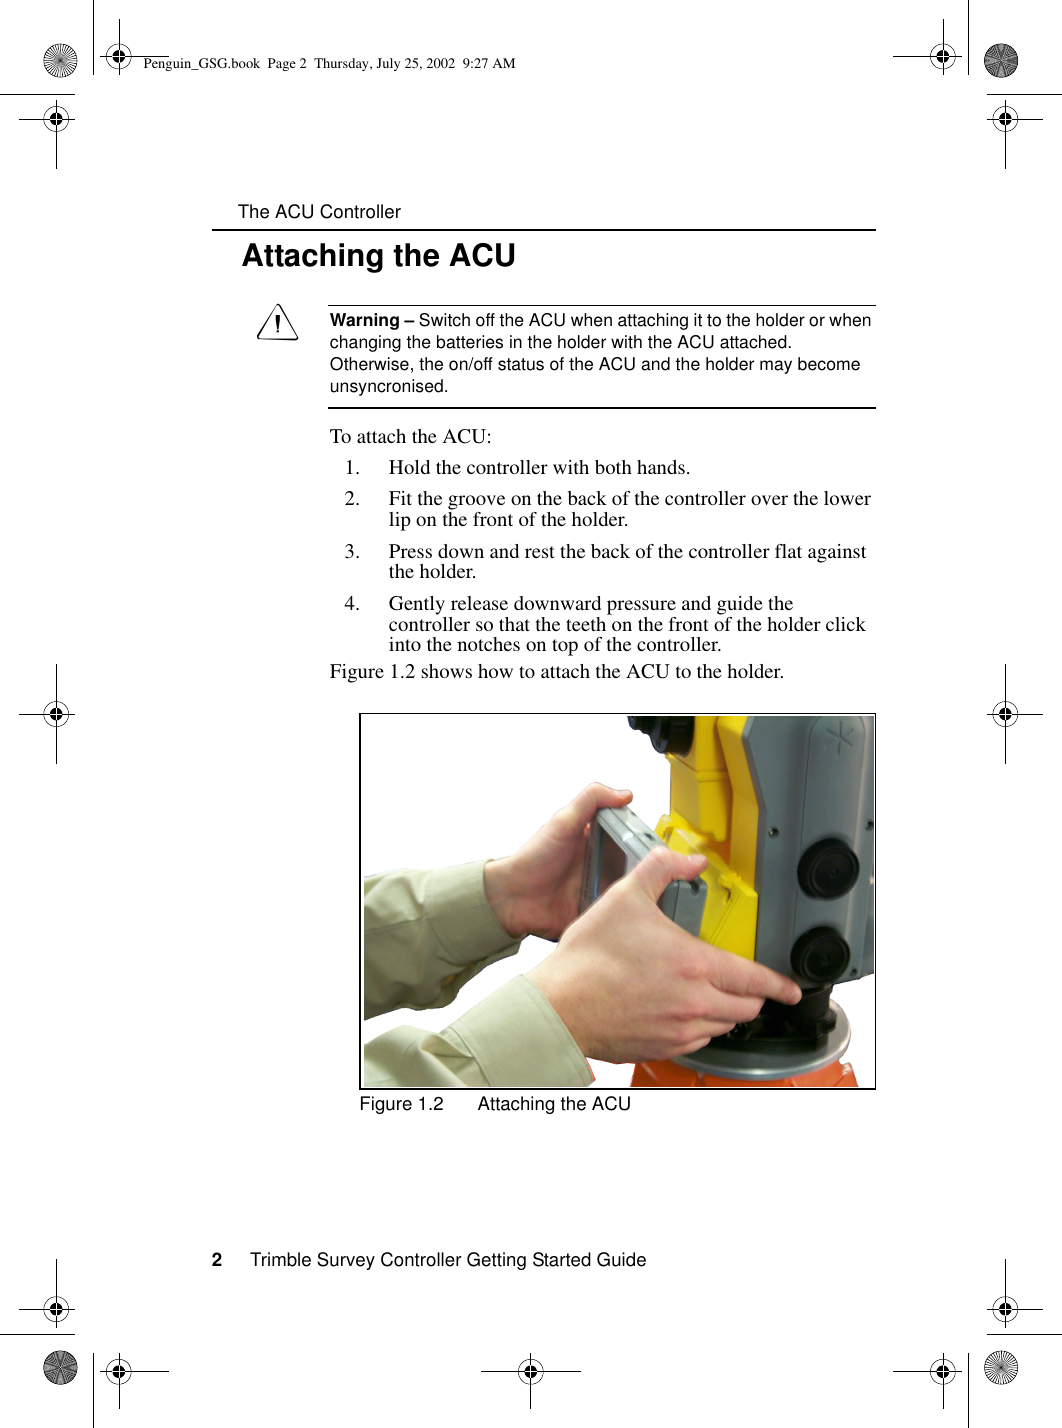      The ACU Controller2     Trimble Survey Controller Getting Started Guide1.1 Attaching the ACUCWarning – Switch off the ACU when attaching it to the holder or when changing the batteries in the holder with the ACU attached. Otherwise, the on/off status of the ACU and the holder may become unsyncronised. To attach the ACU:1. Hold the controller with both hands. 2. Fit the groove on the back of the controller over the lower lip on the front of the holder.3. Press down and rest the back of the controller flat against the holder.4. Gently release downward pressure and guide the controller so that the teeth on the front of the holder click into the notches on top of the controller.Figure 1.2 shows how to attach the ACU to the holder.Figure 1.2 Attaching the ACUPenguin_GSG.book  Page 2  Thursday, July 25, 2002  9:27 AM